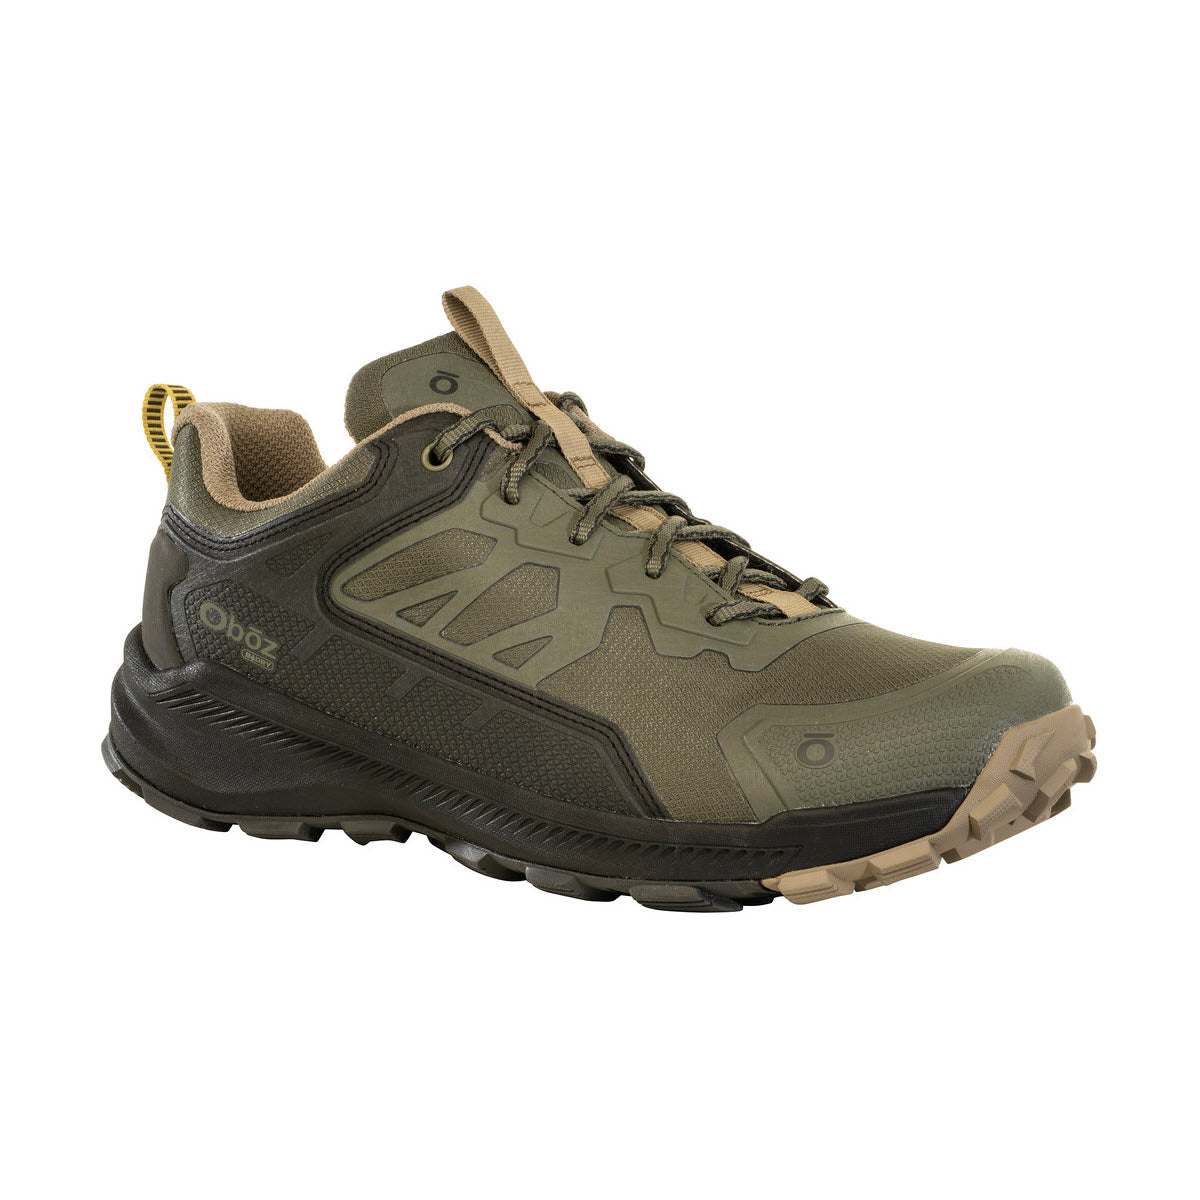 A single olive green OBOZ KATABATIC LOW B-DRY EVERGREEN hiking shoe is displayed against a white background.